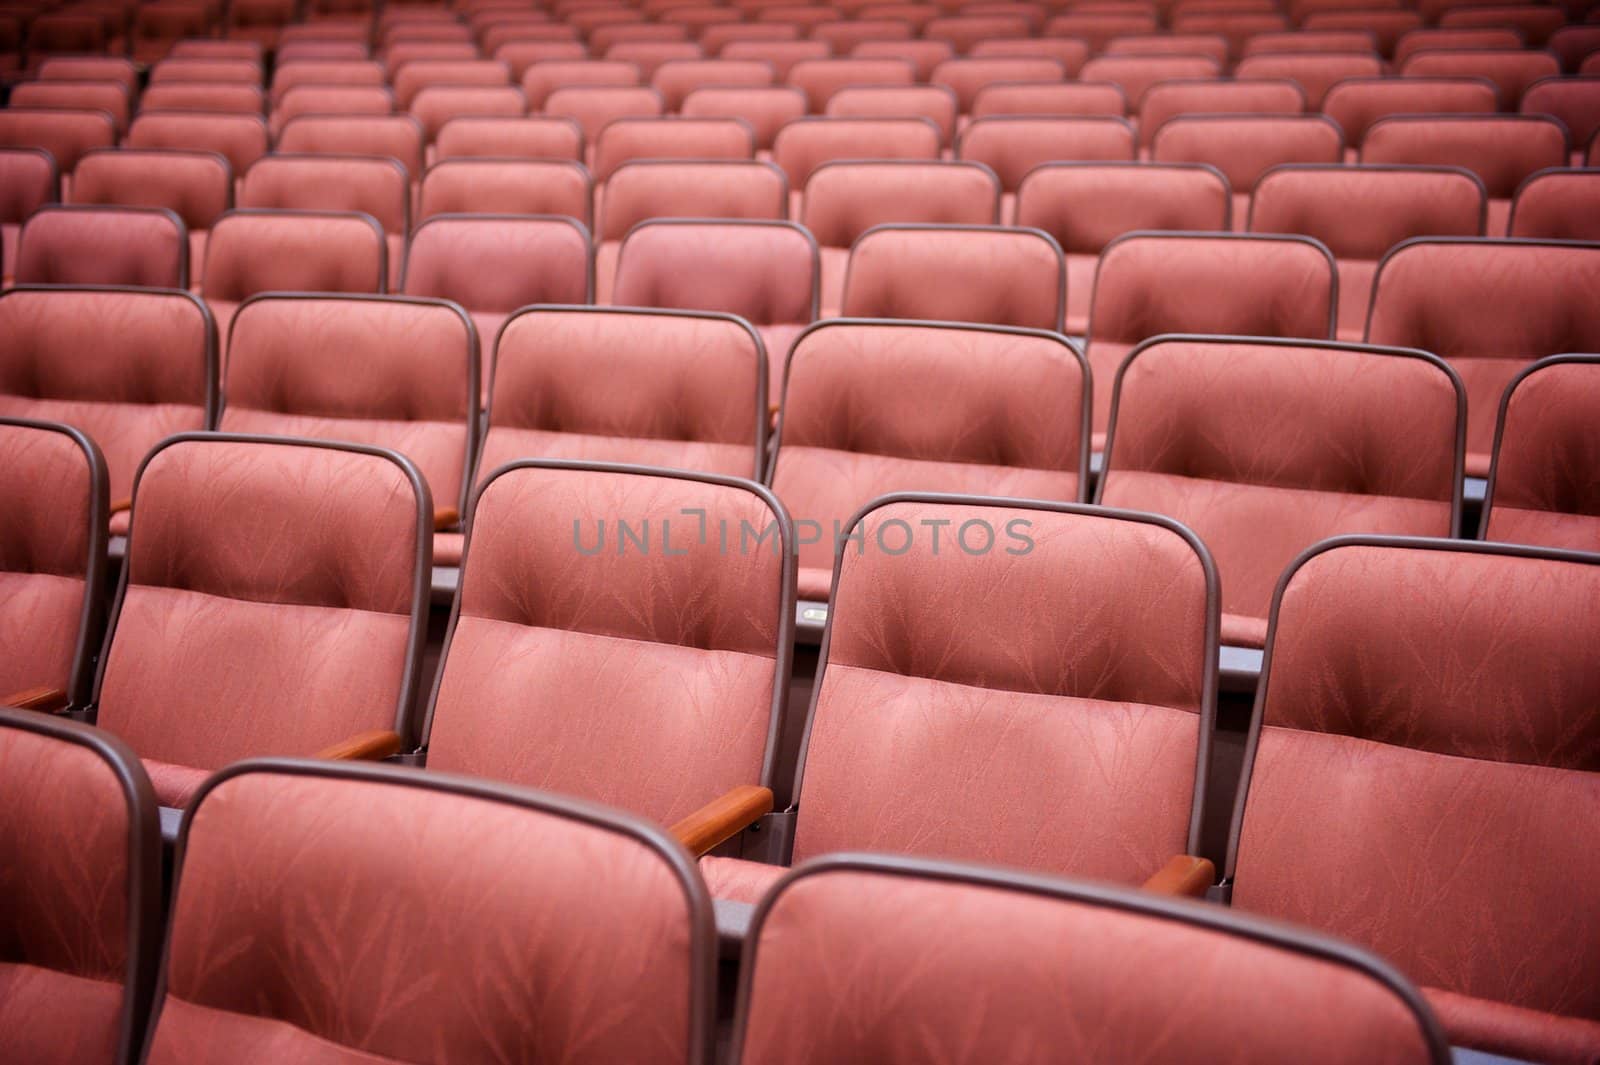 Many Rows of Empty Theatre Seating by pixelsnap